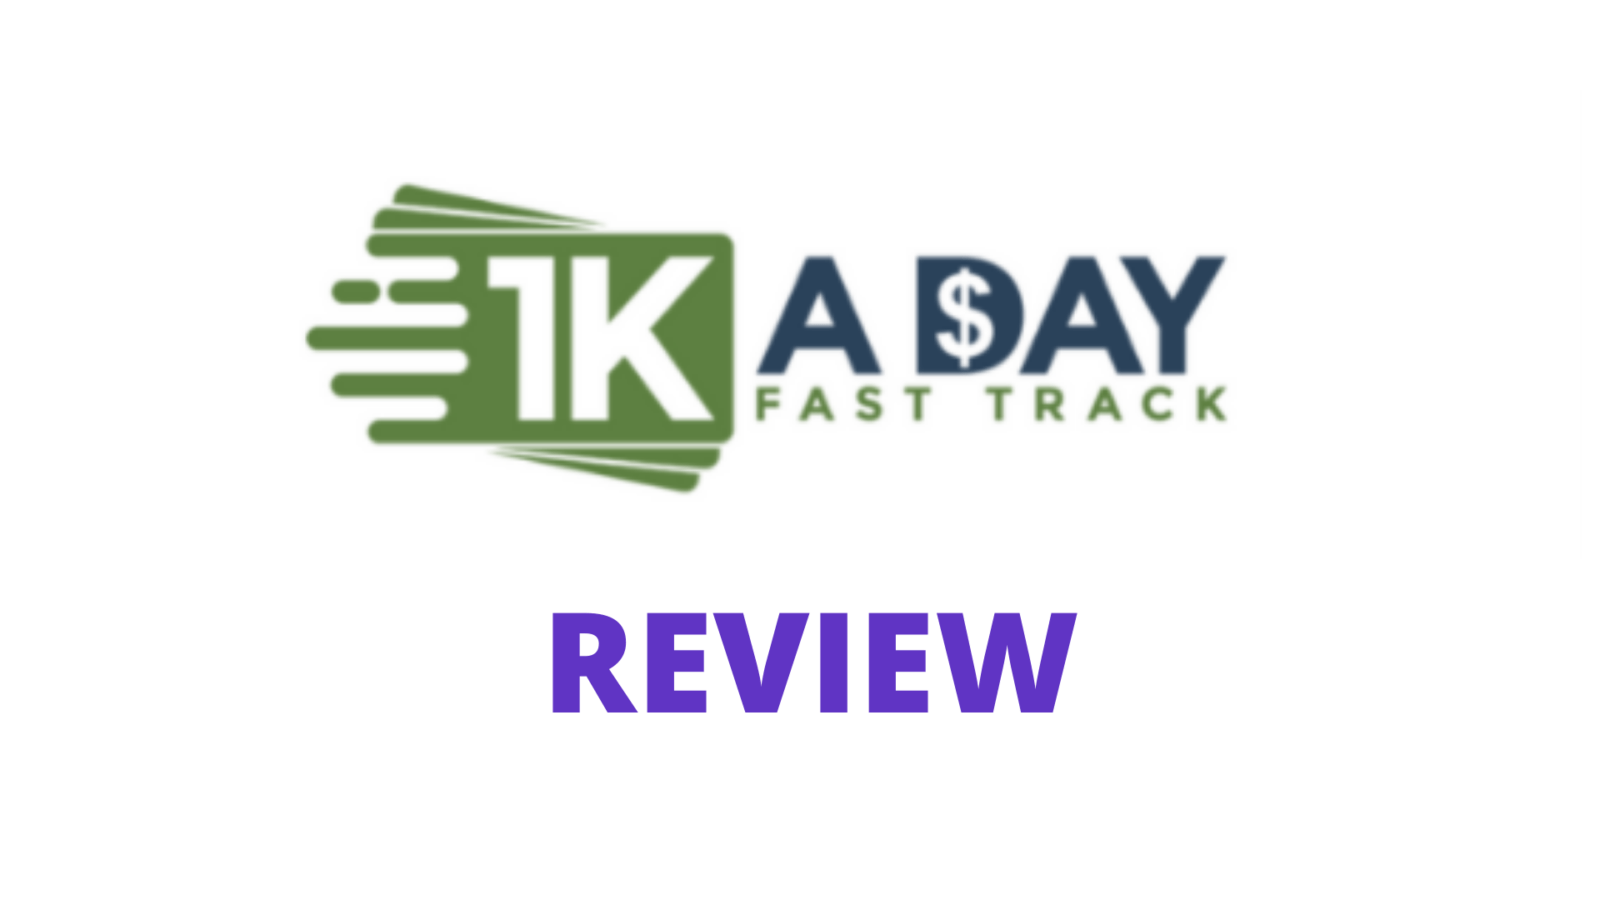 1k a Day Fast Track Review